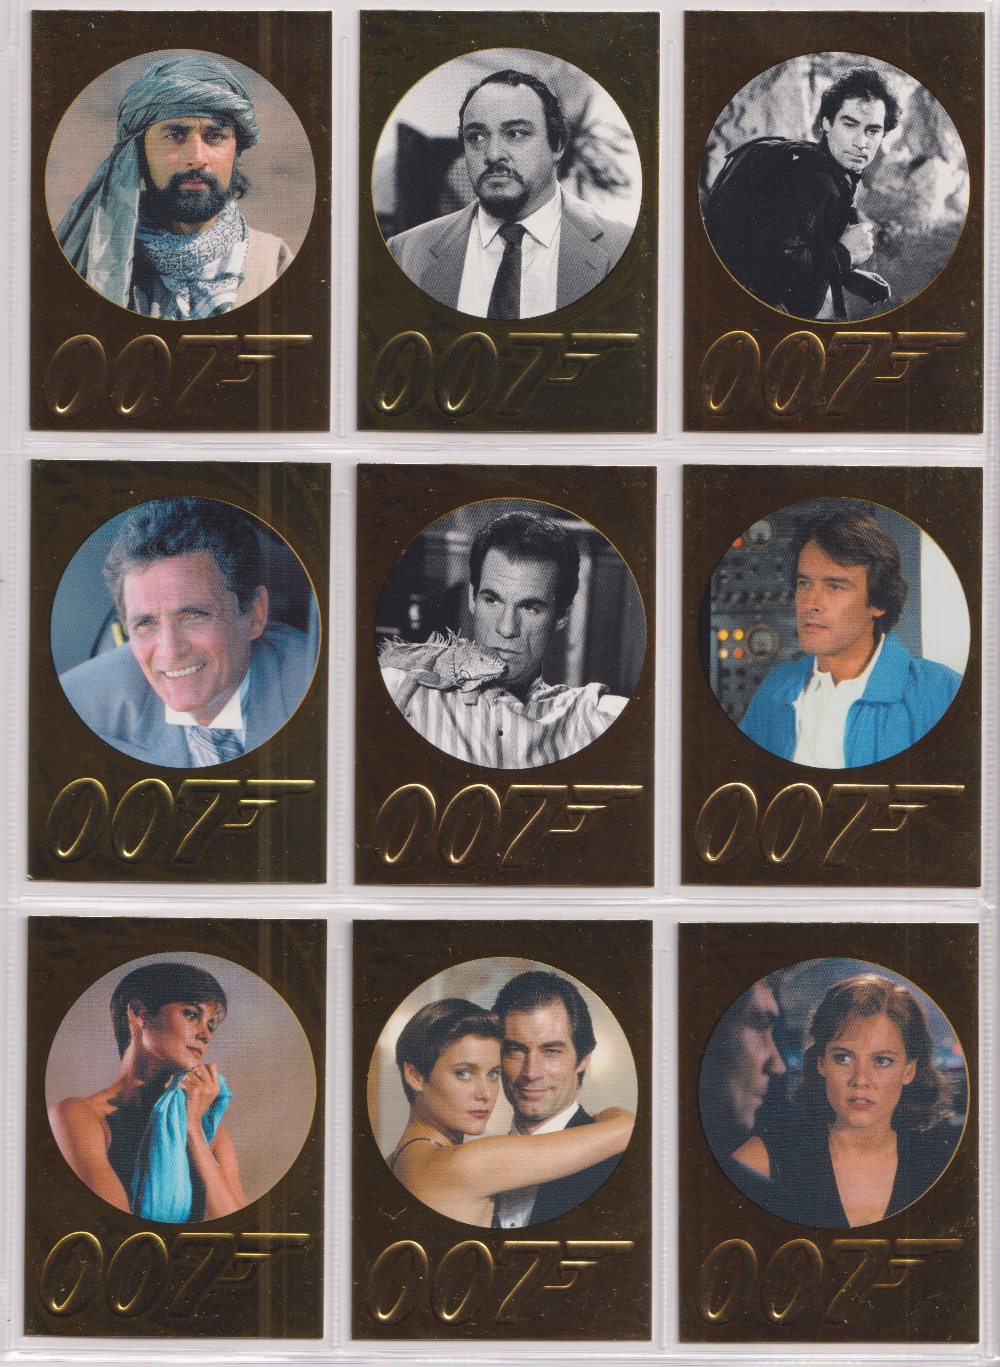 James Bond, 50th Anniversary Trading Cards Gold Cards (set of 198), Skyfall silhouette (4), Gold - Image 7 of 37